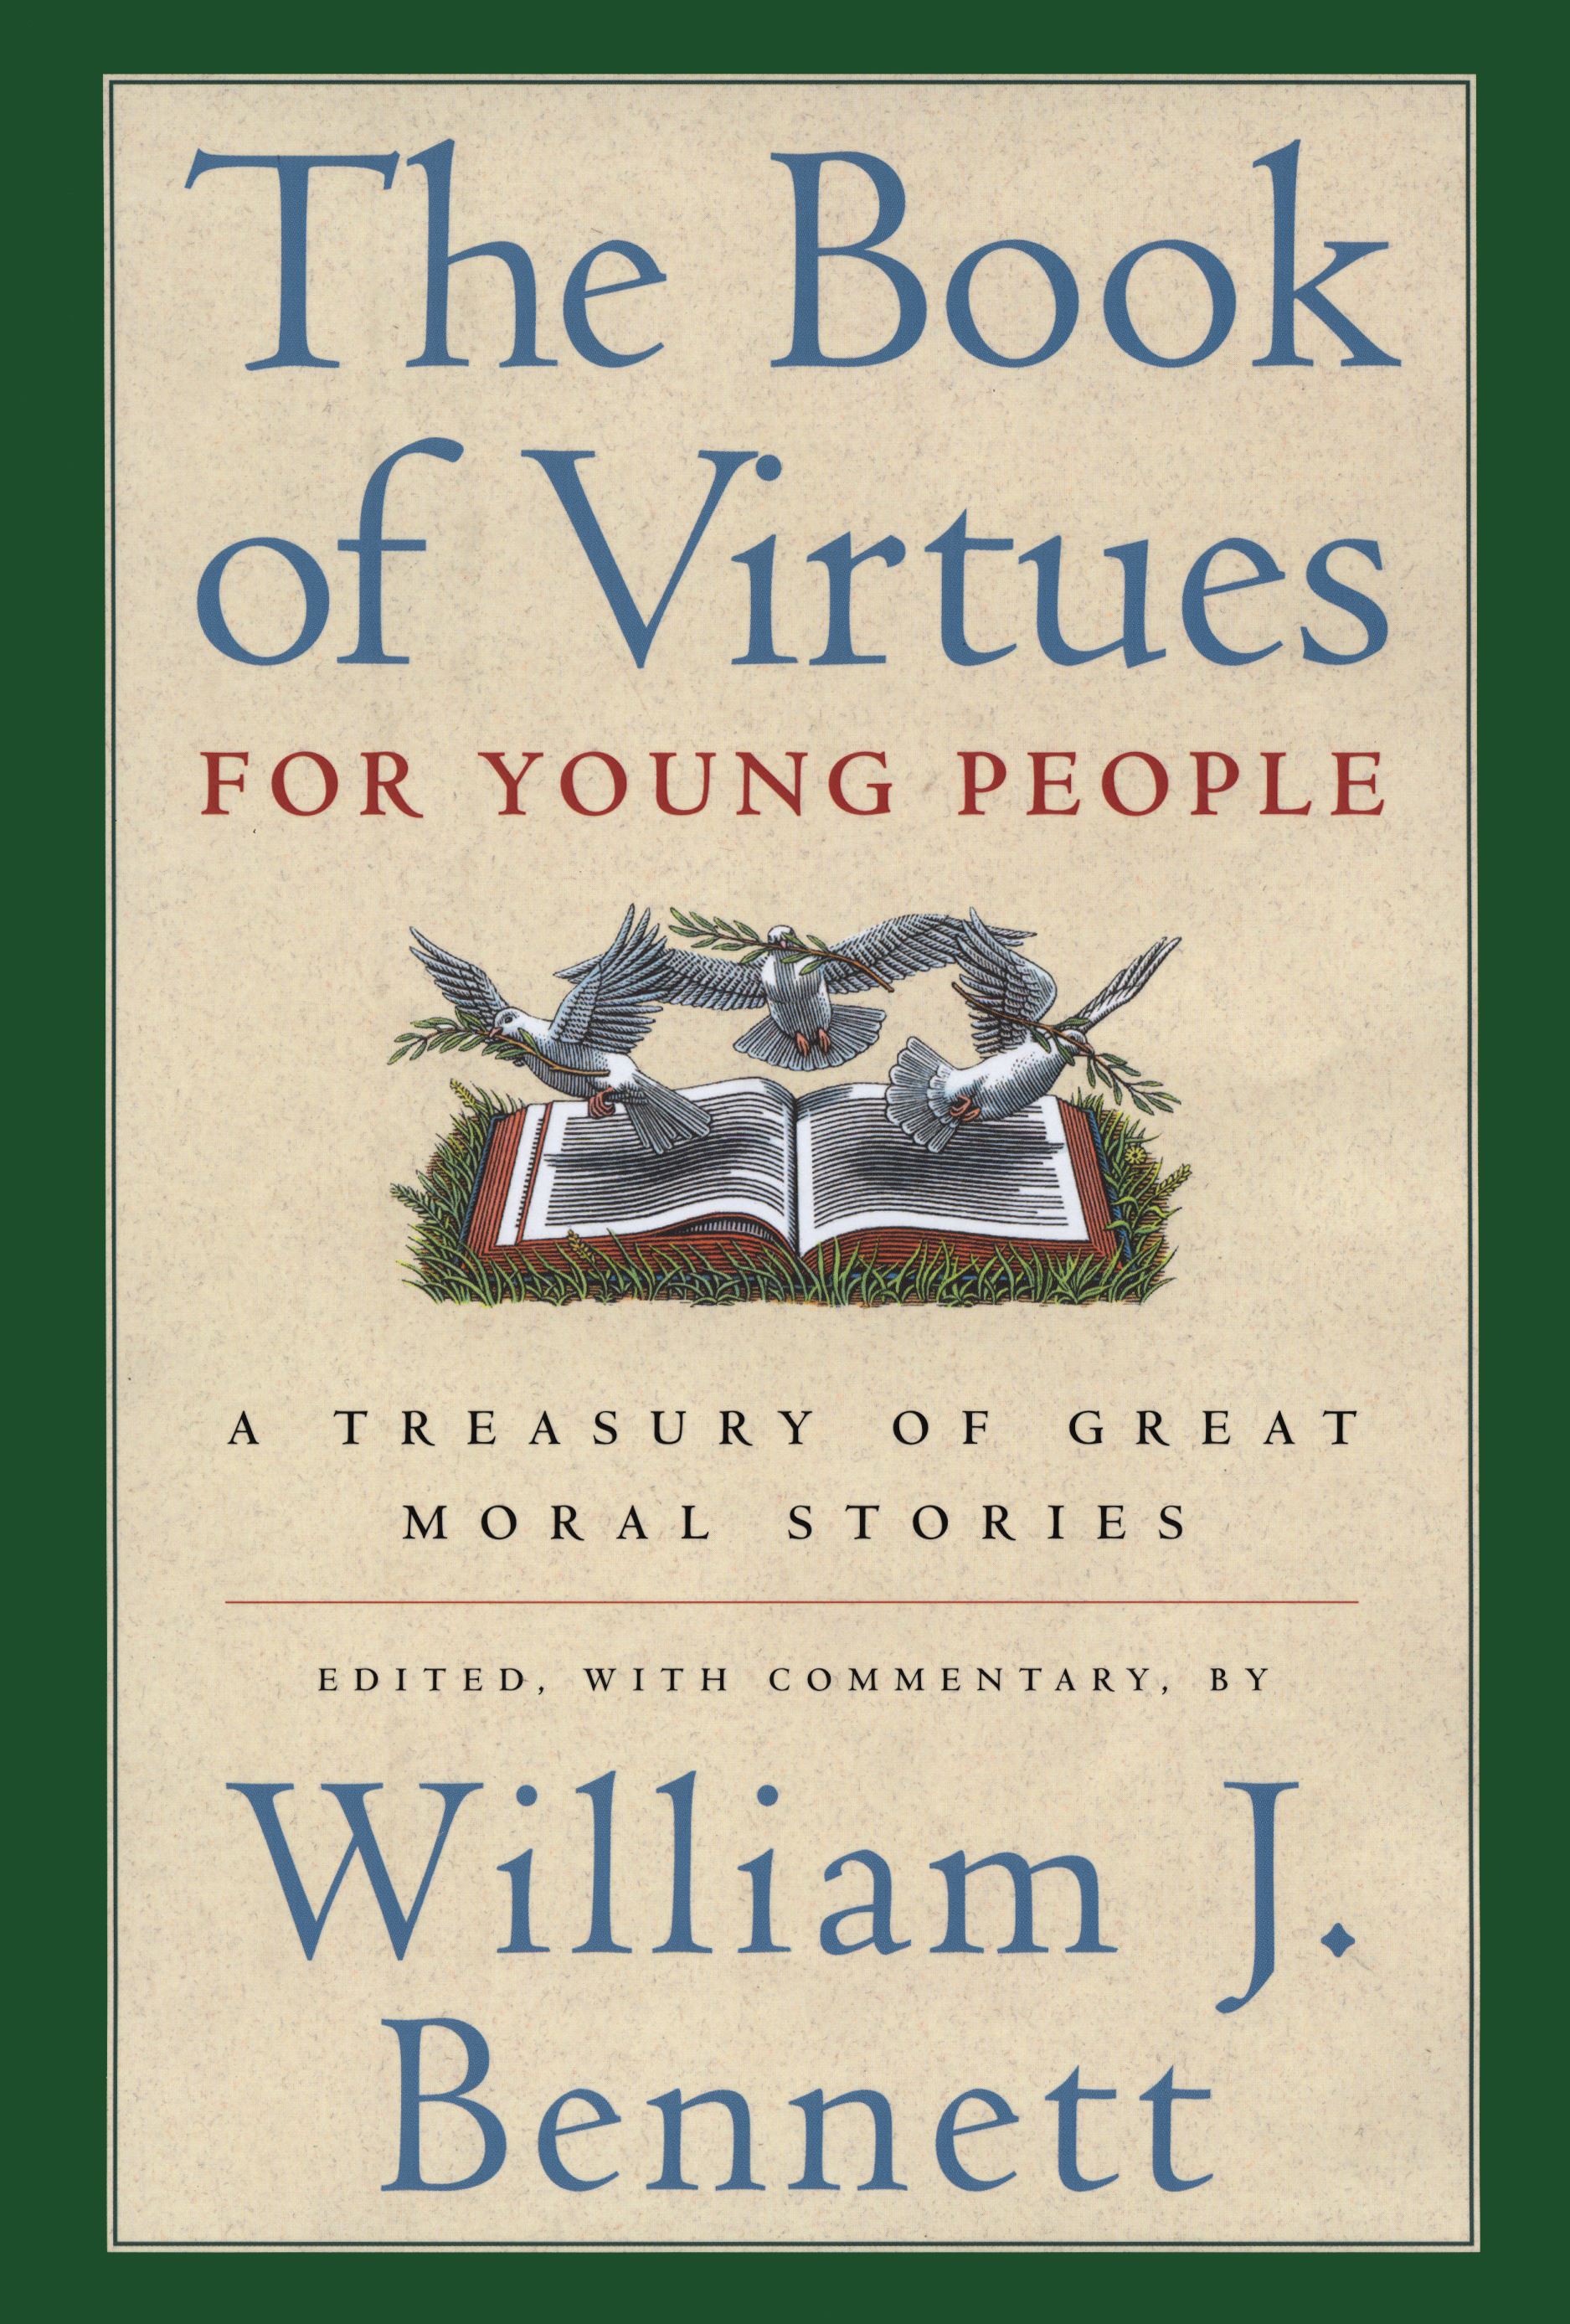 The Book of Virtues for Young People A Treasury of Great Moral Stories Edited by William J. Bennett